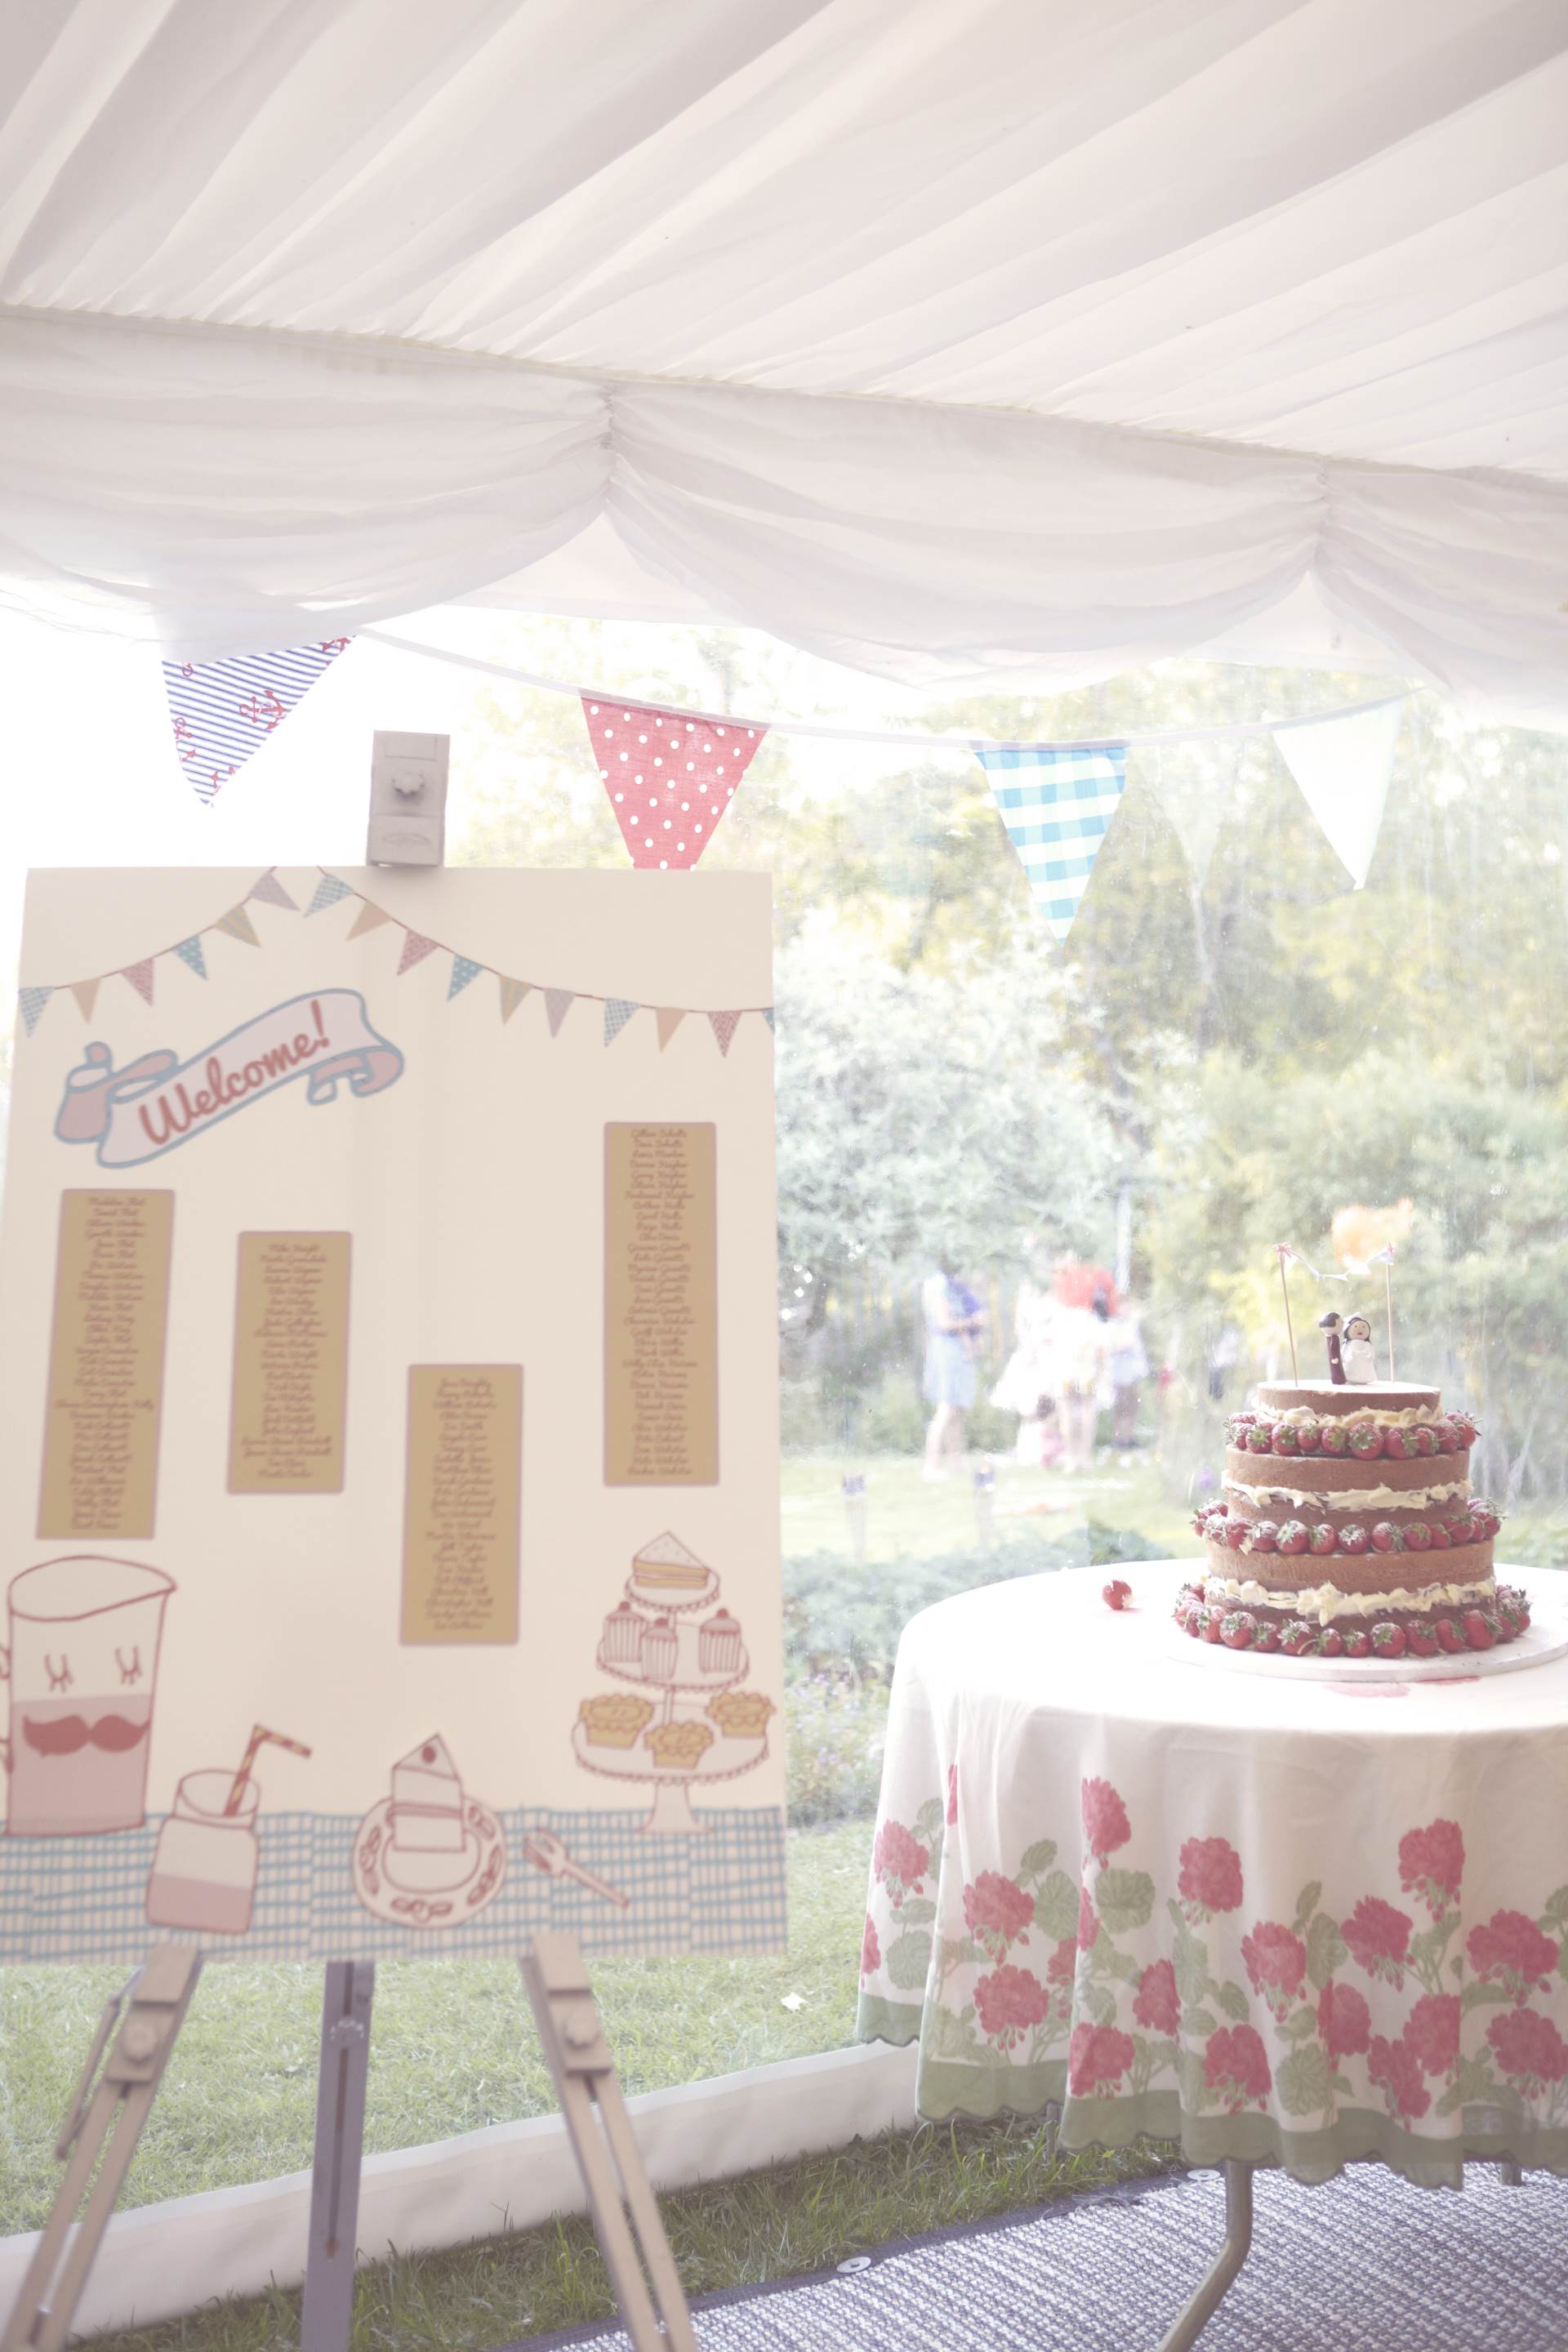 Dan and Maddi's Vintage Americana Country Wedding by Natalie J Weddings and featured on The National Vintage Wedding Fair Dan and Maddi's Vintage Americana Country Wedding by Natalie J Weddings and featured on The National Vintage Wedding Fair